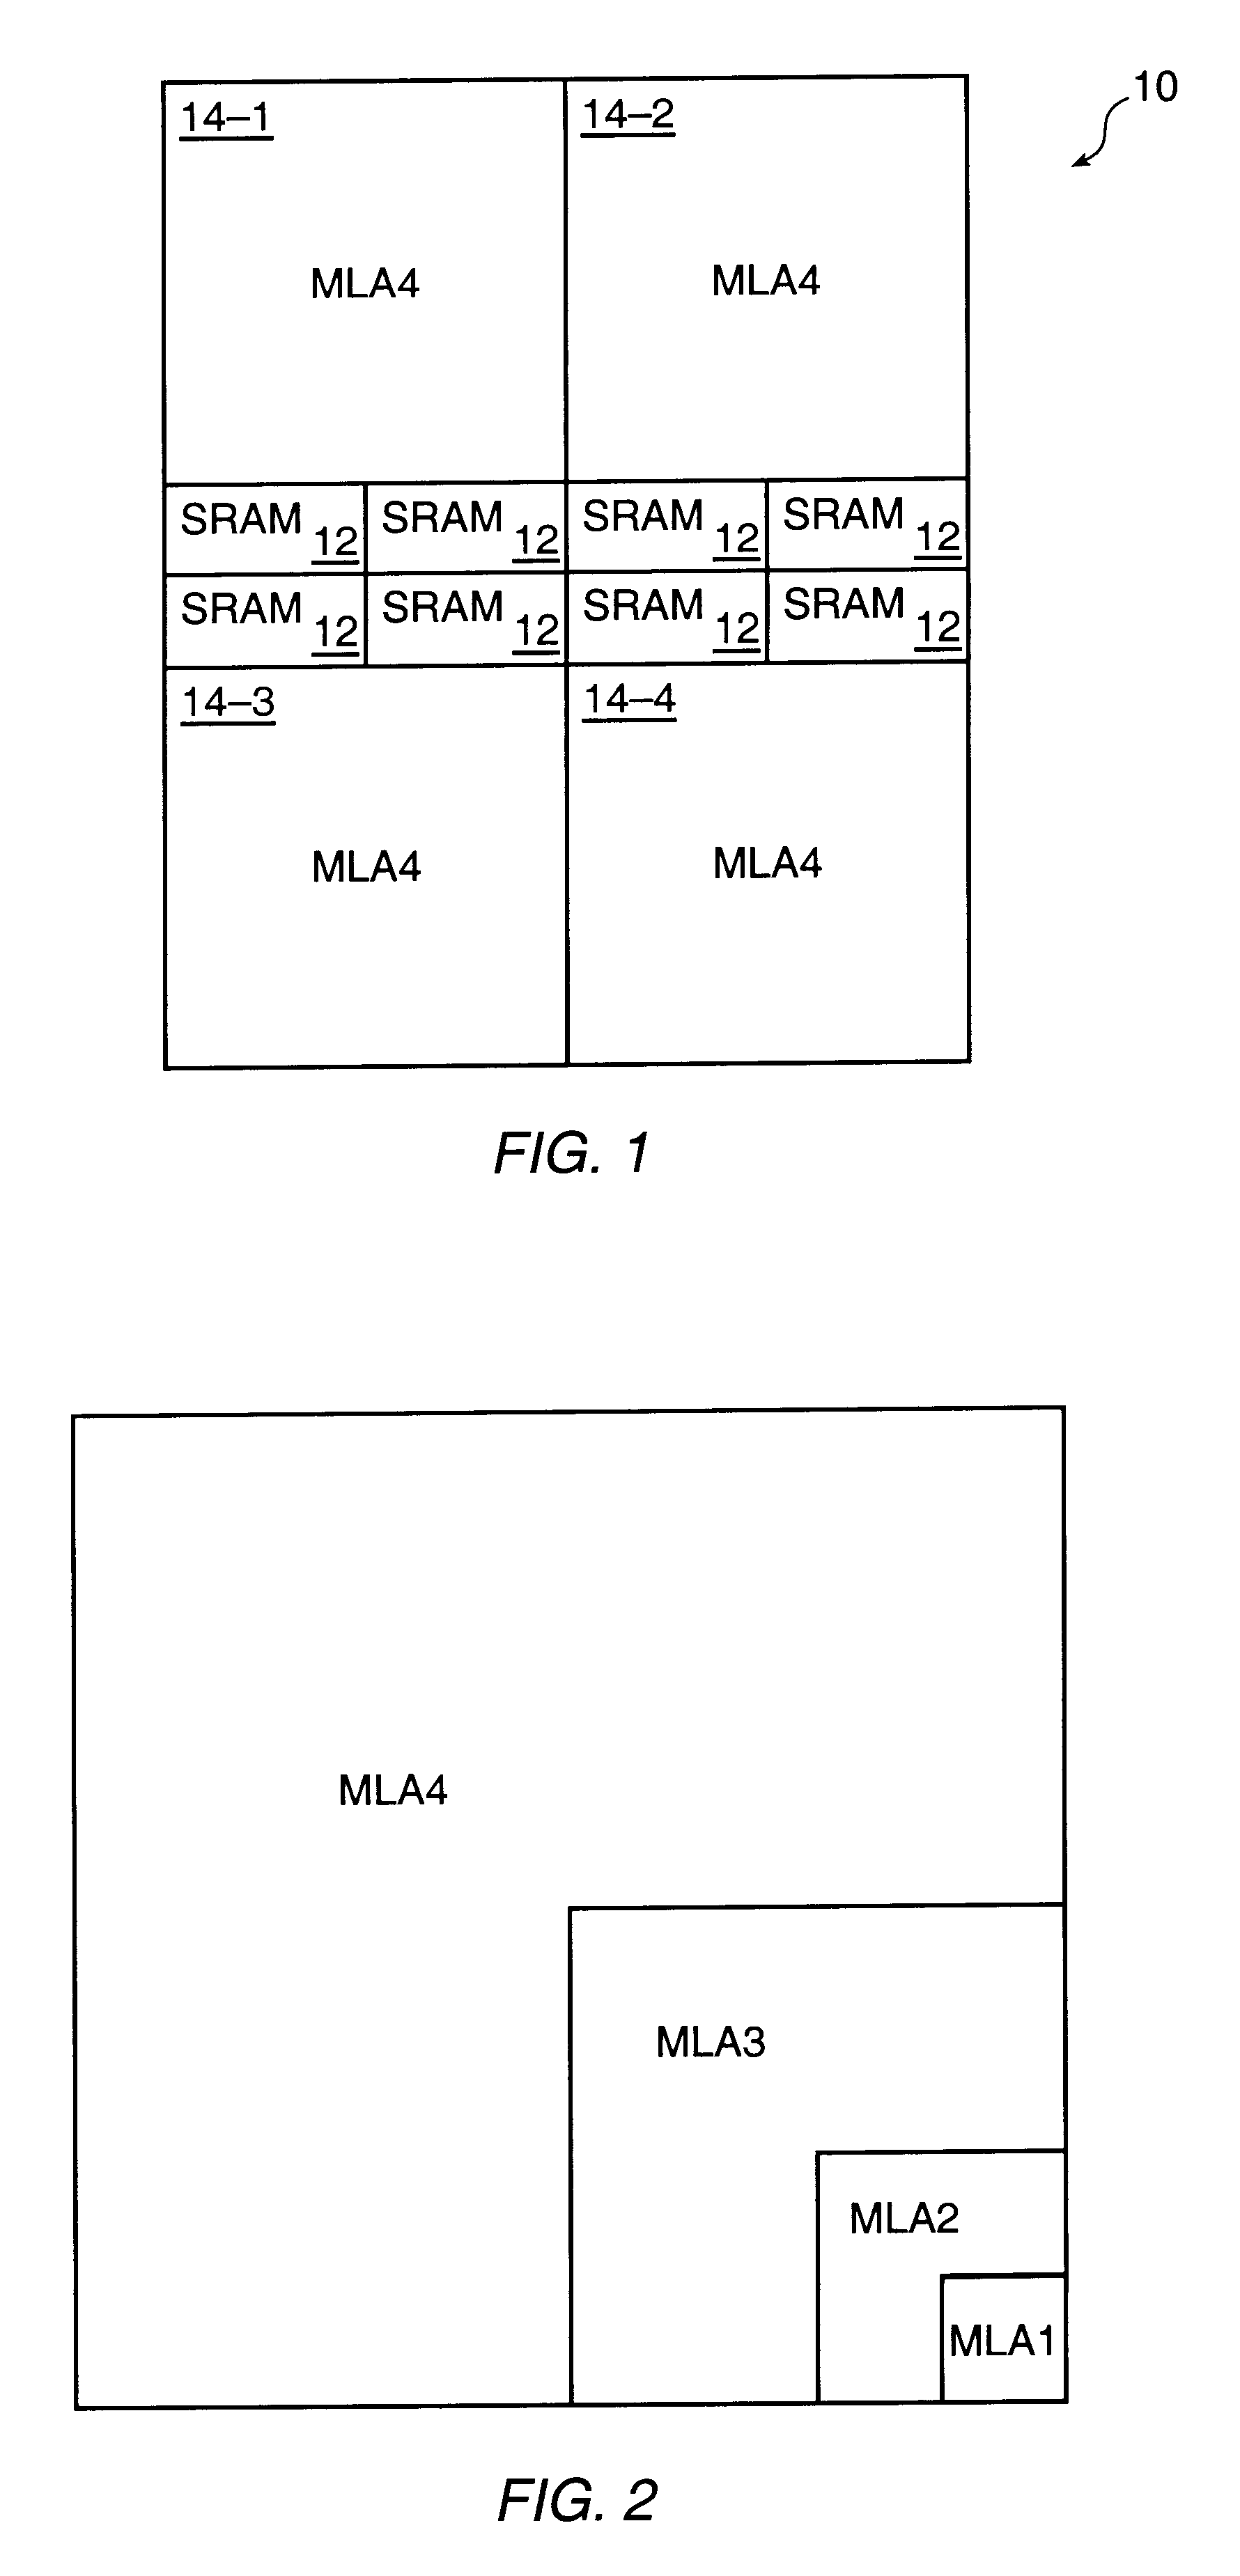 Methods for errors checking the configuration SRAM and user assignable SRAM data in a field programmable gate array